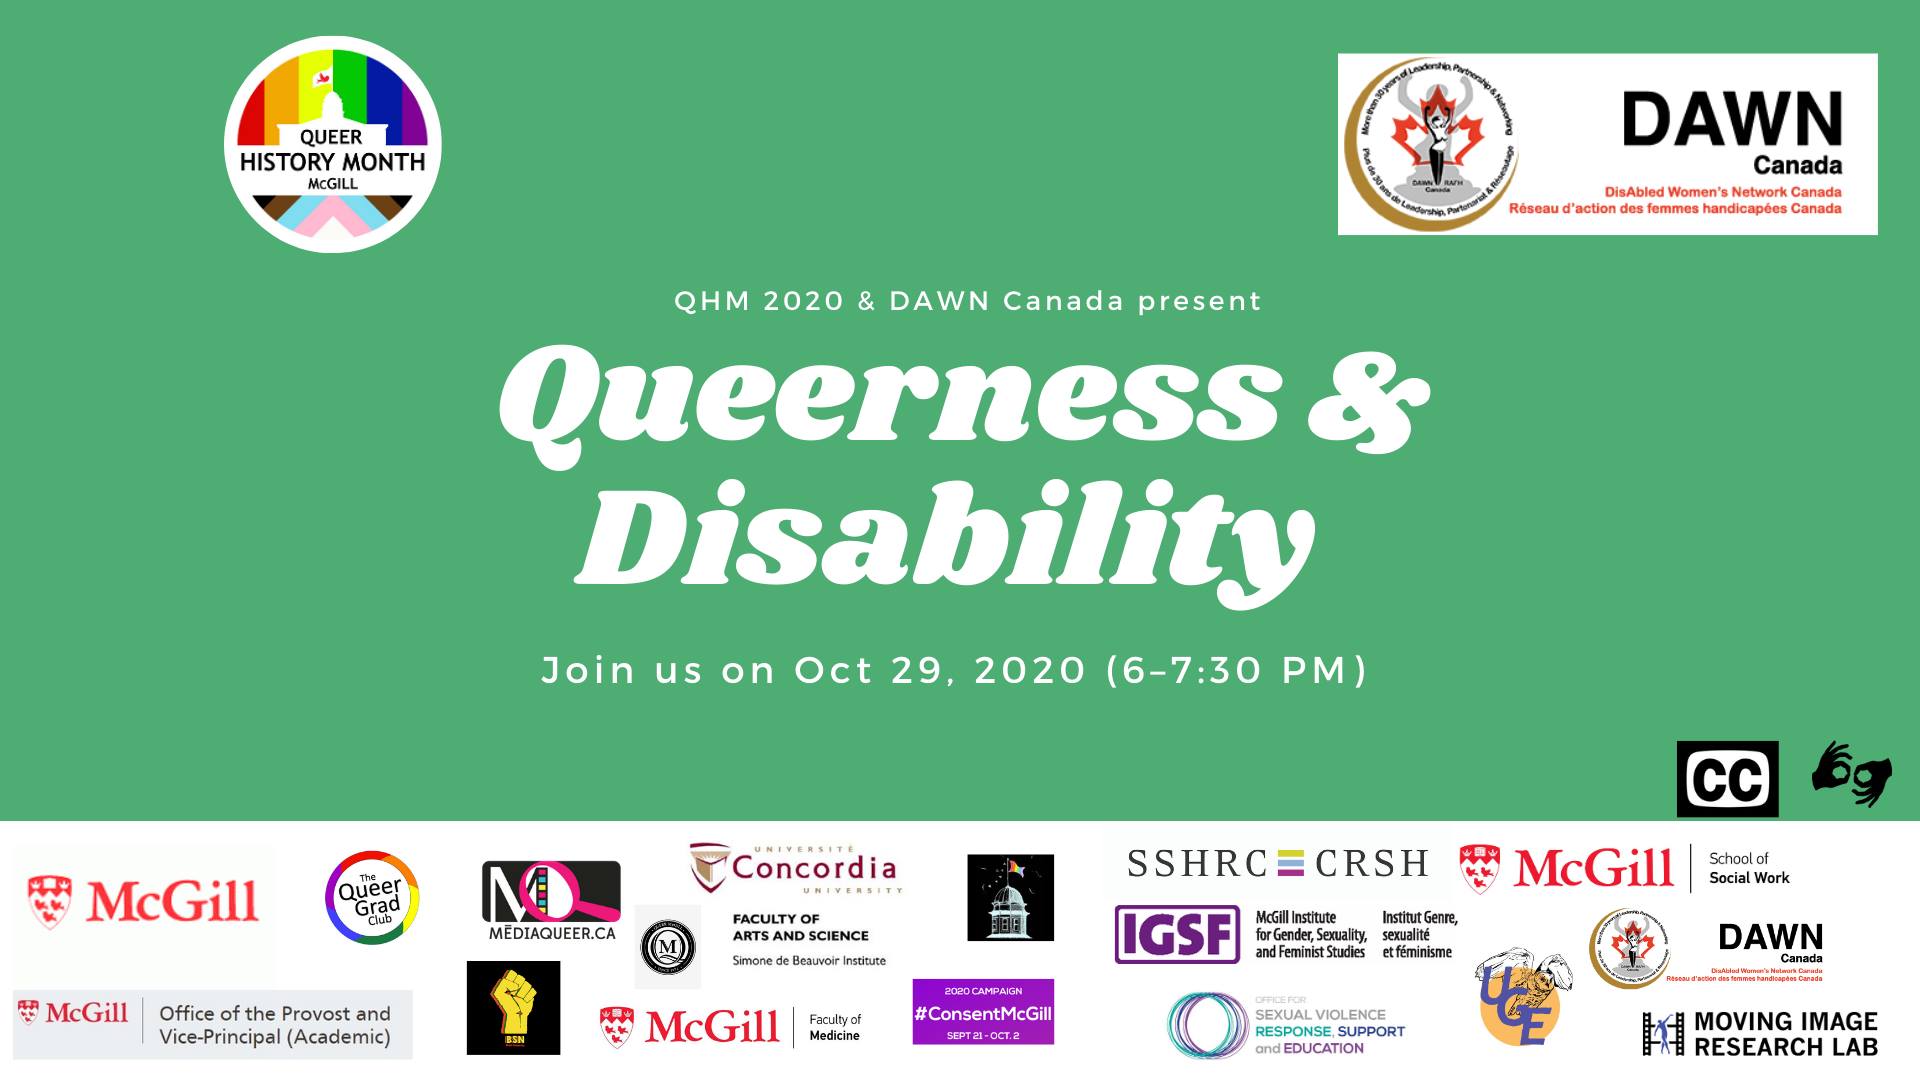 QueerEvents.ca - virtual event listing - queerness and disability panel